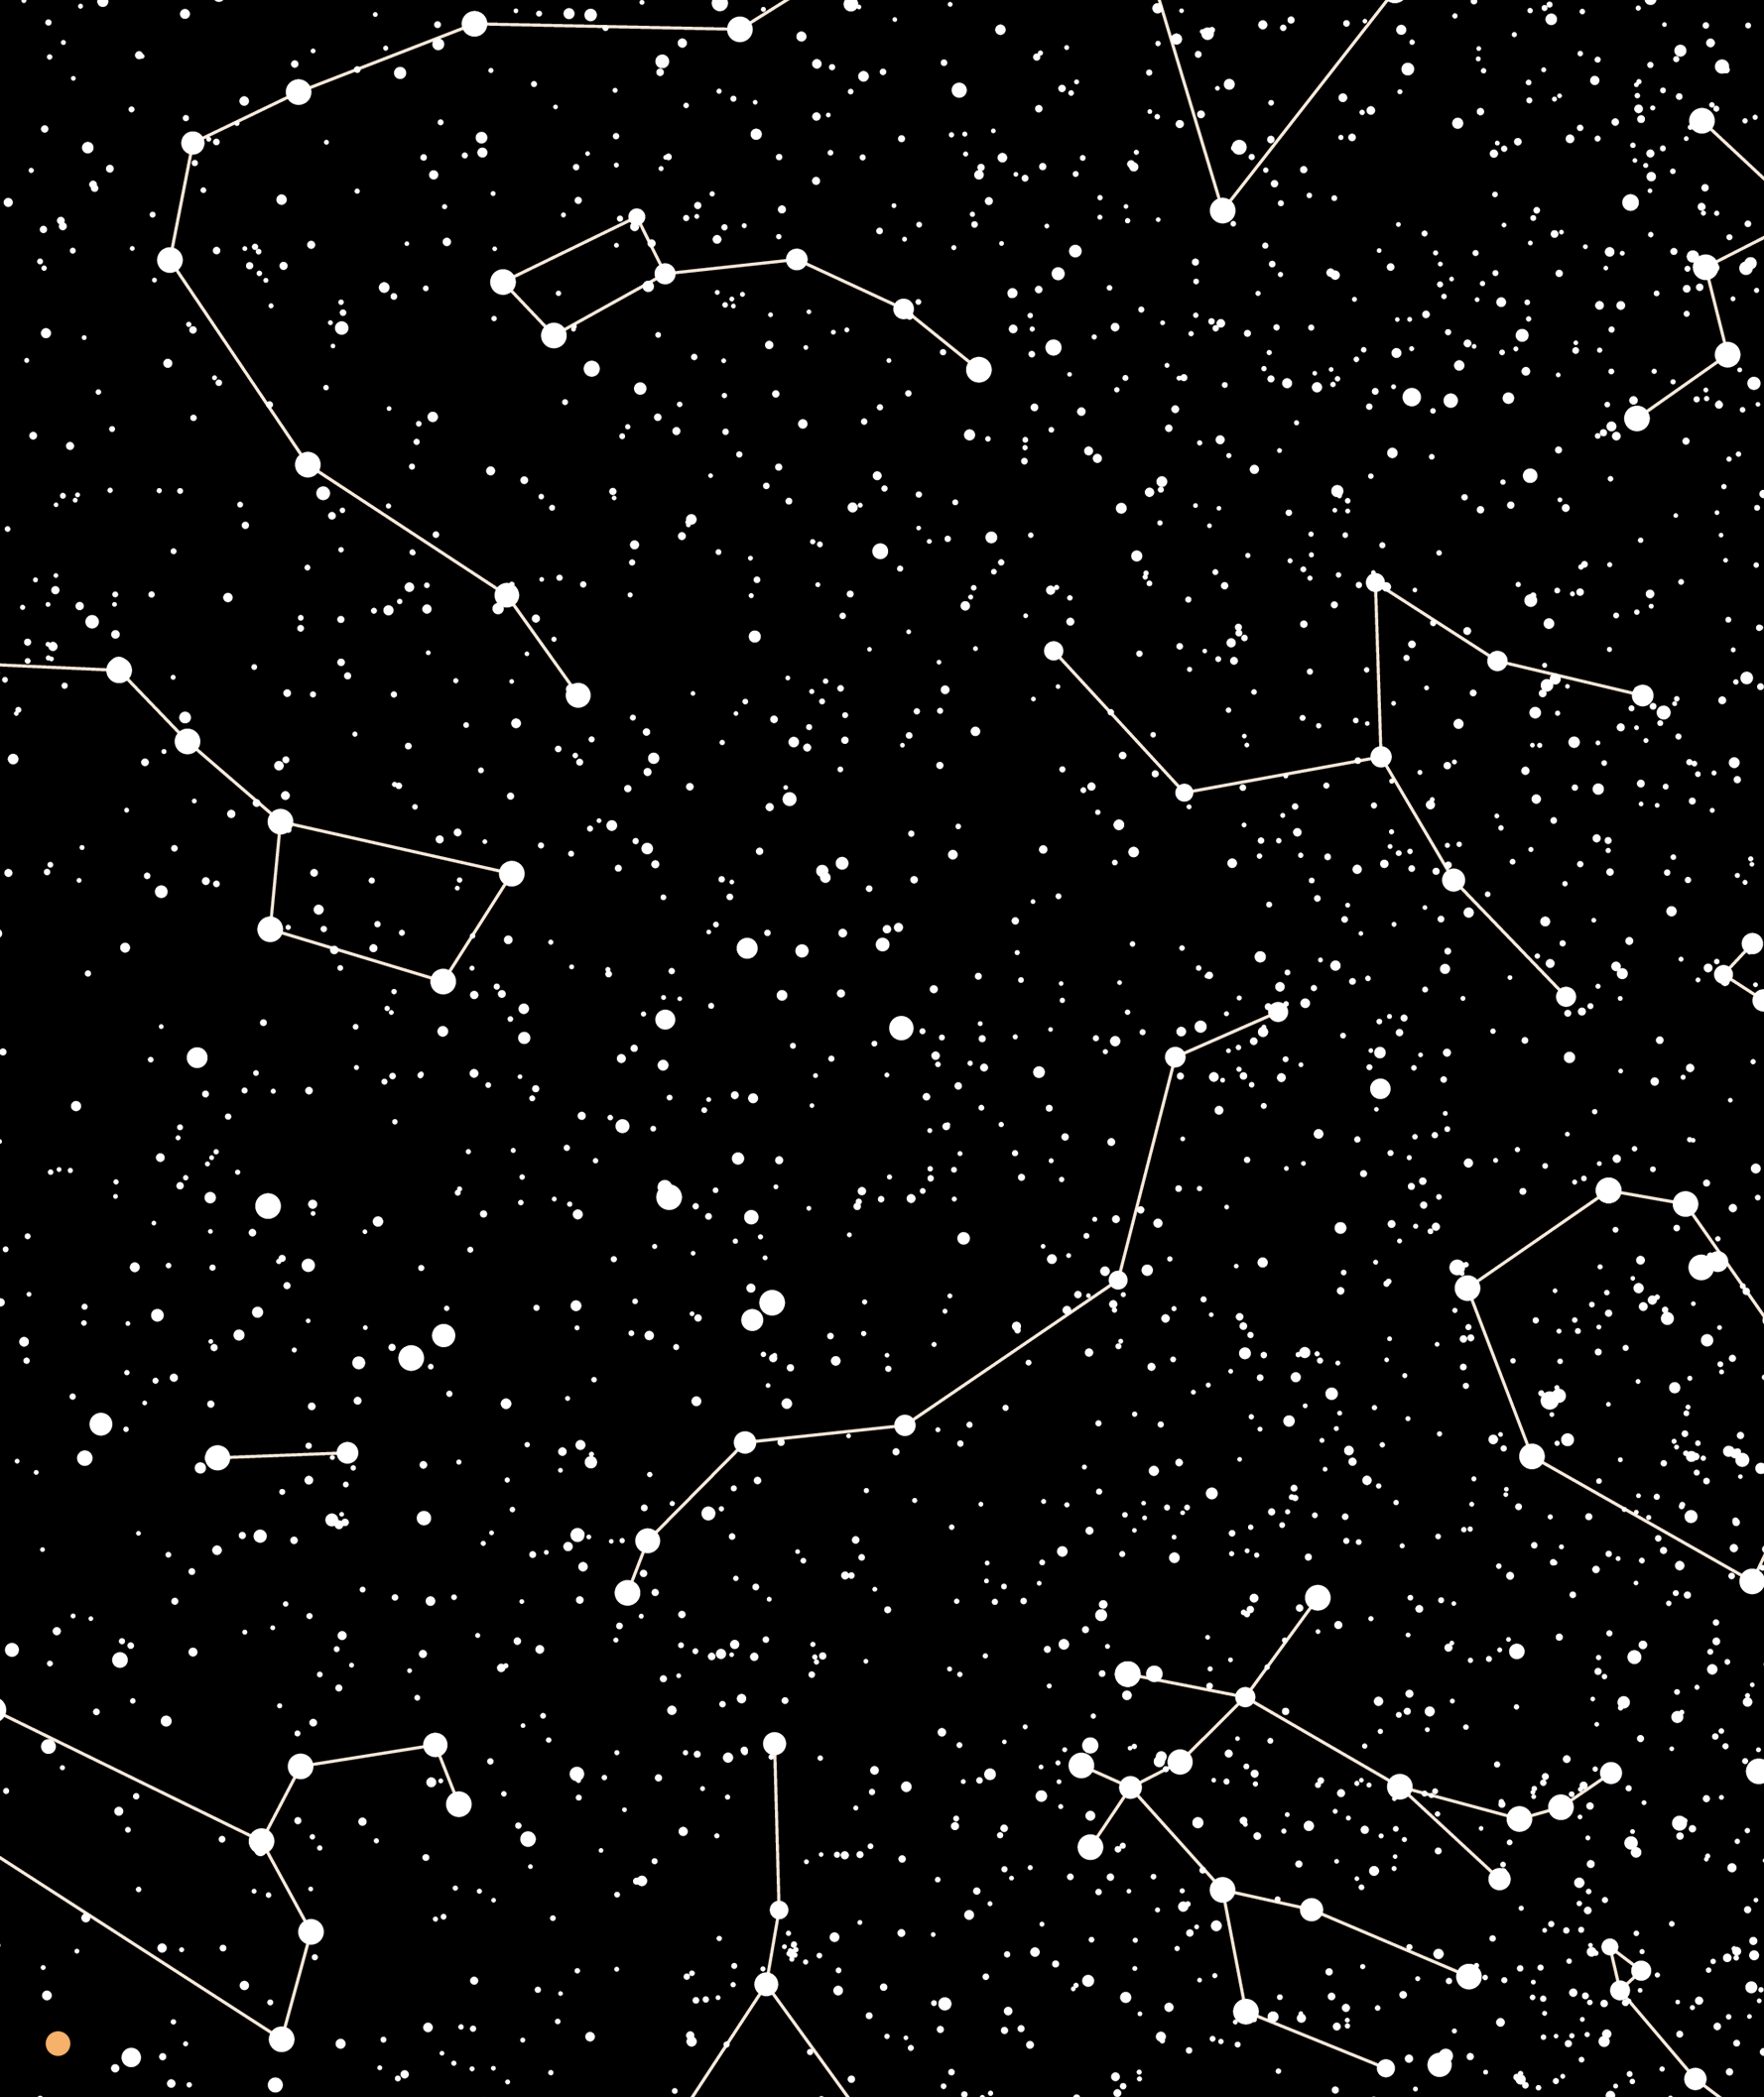 Star map gift ideas. Map gifts, Star map, Black aesthetic wallpaper